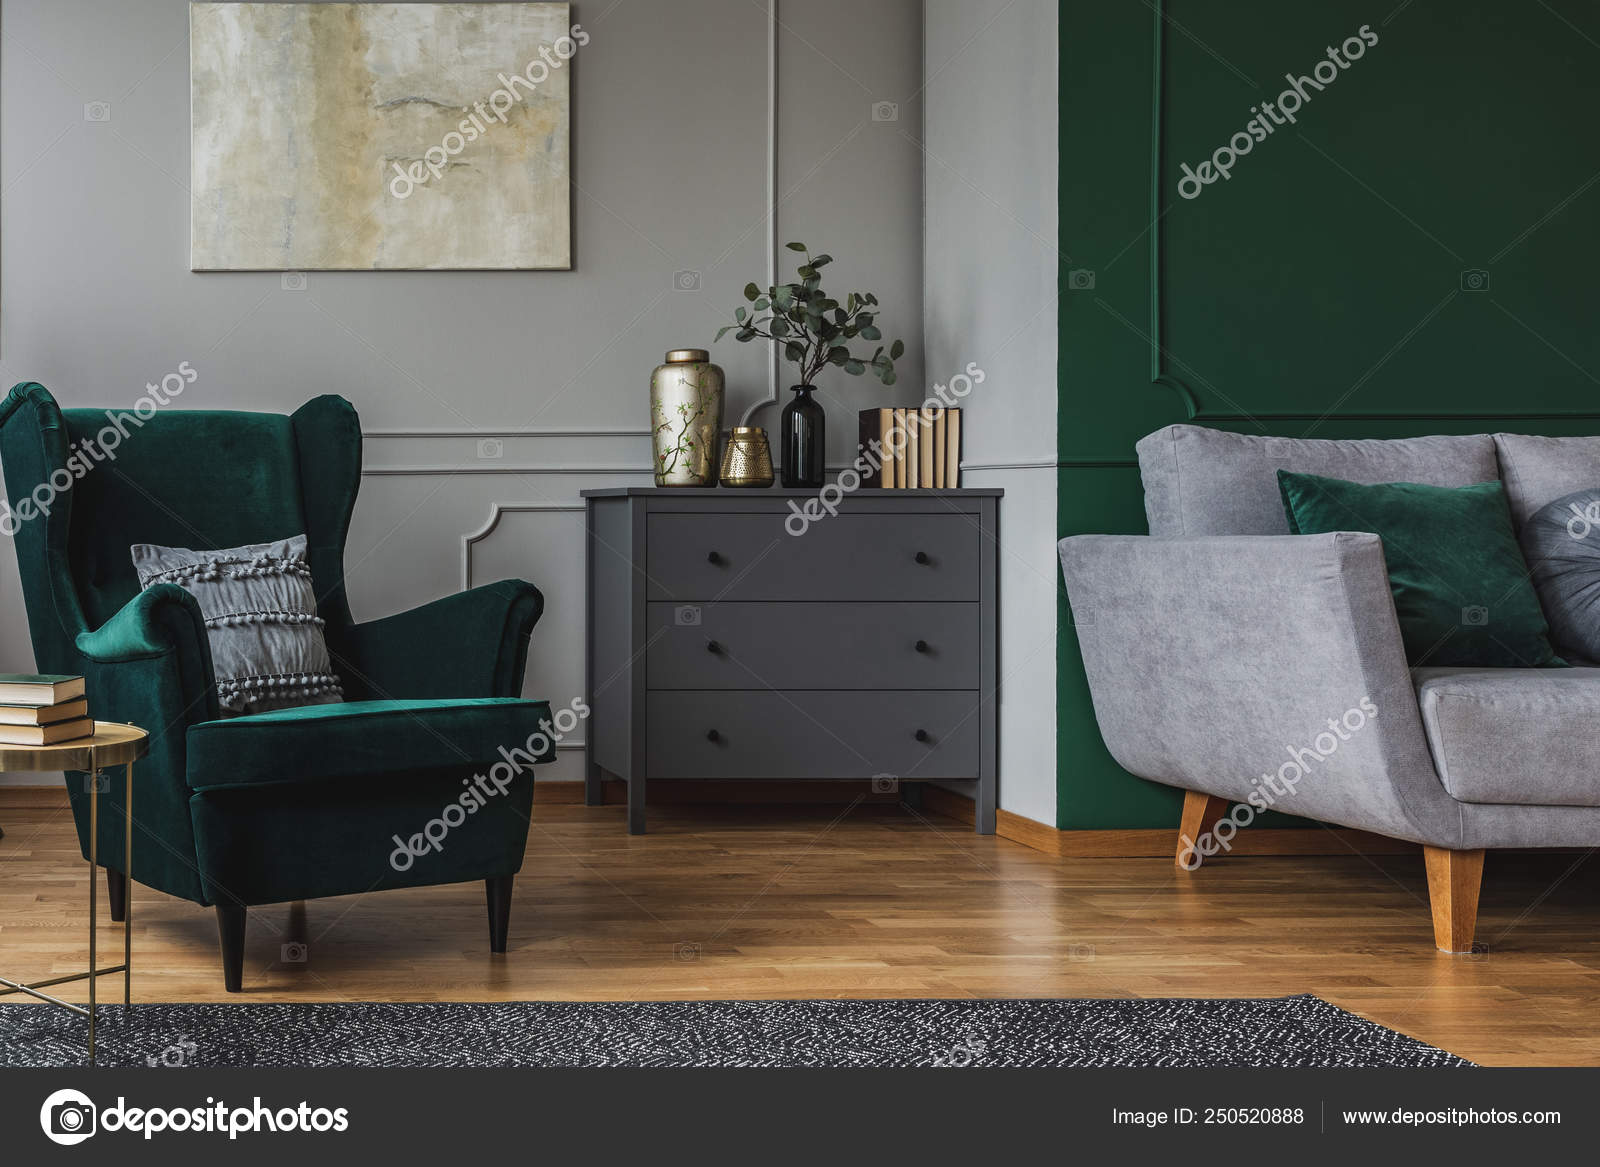 emerald green armchair with pillow next to grey wooden commode in dark  living room interior 250520888